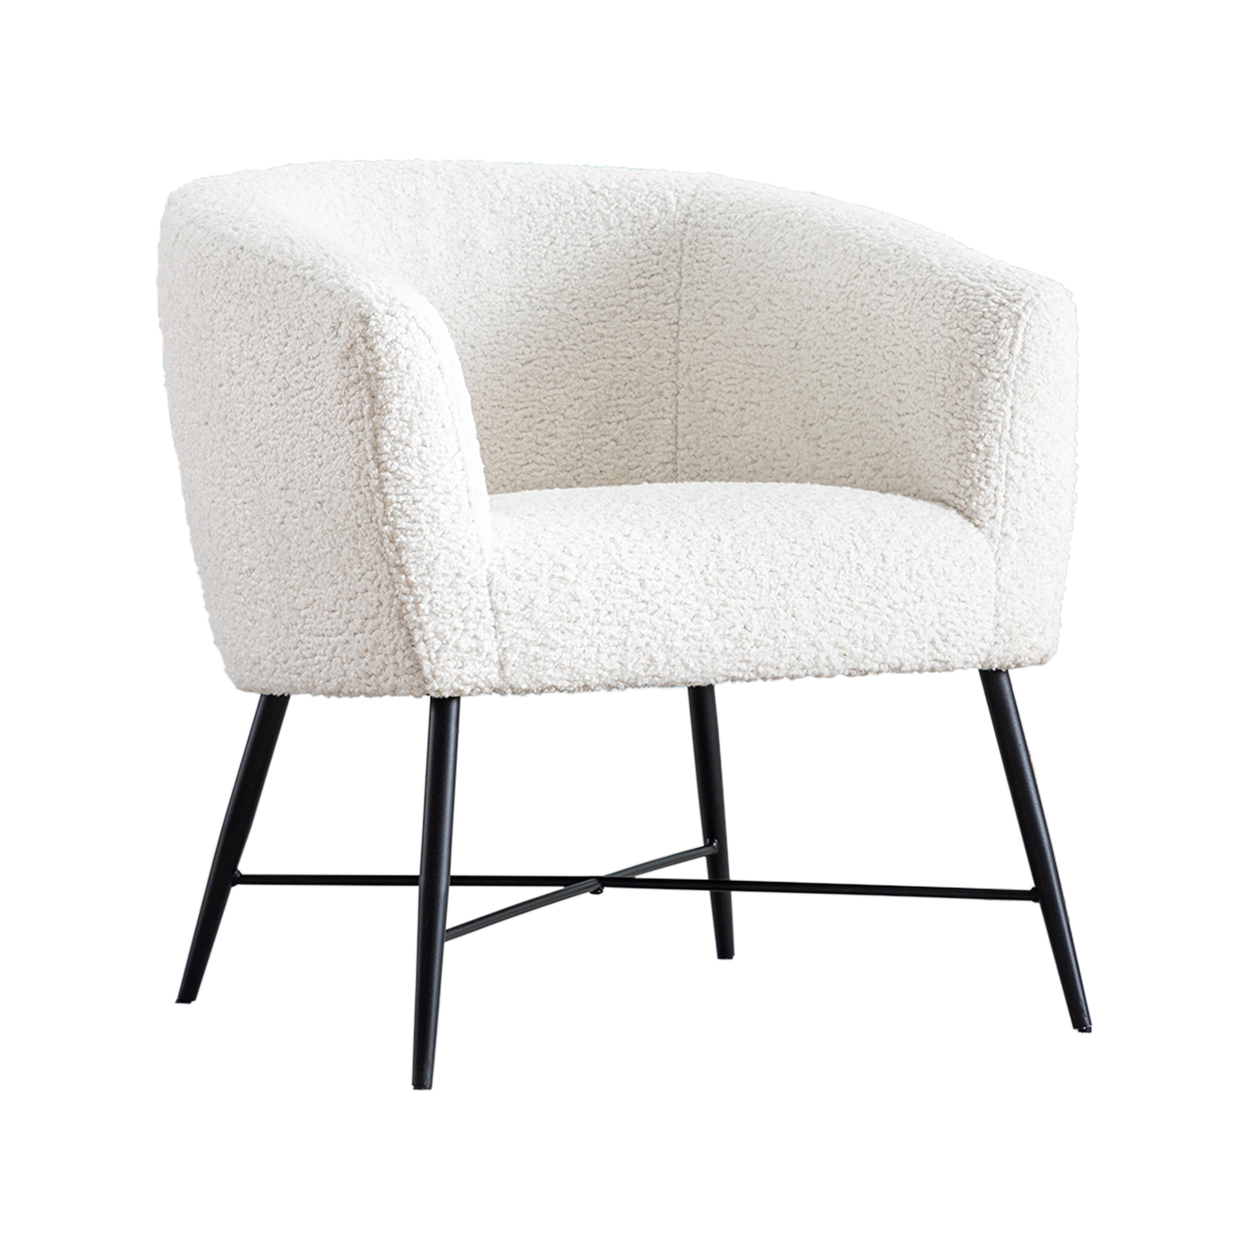 Ino 28 Inch Accent Chair, White Wool Like Fabric, Curved Back, Shelter Arms- Saltoro Sherpi